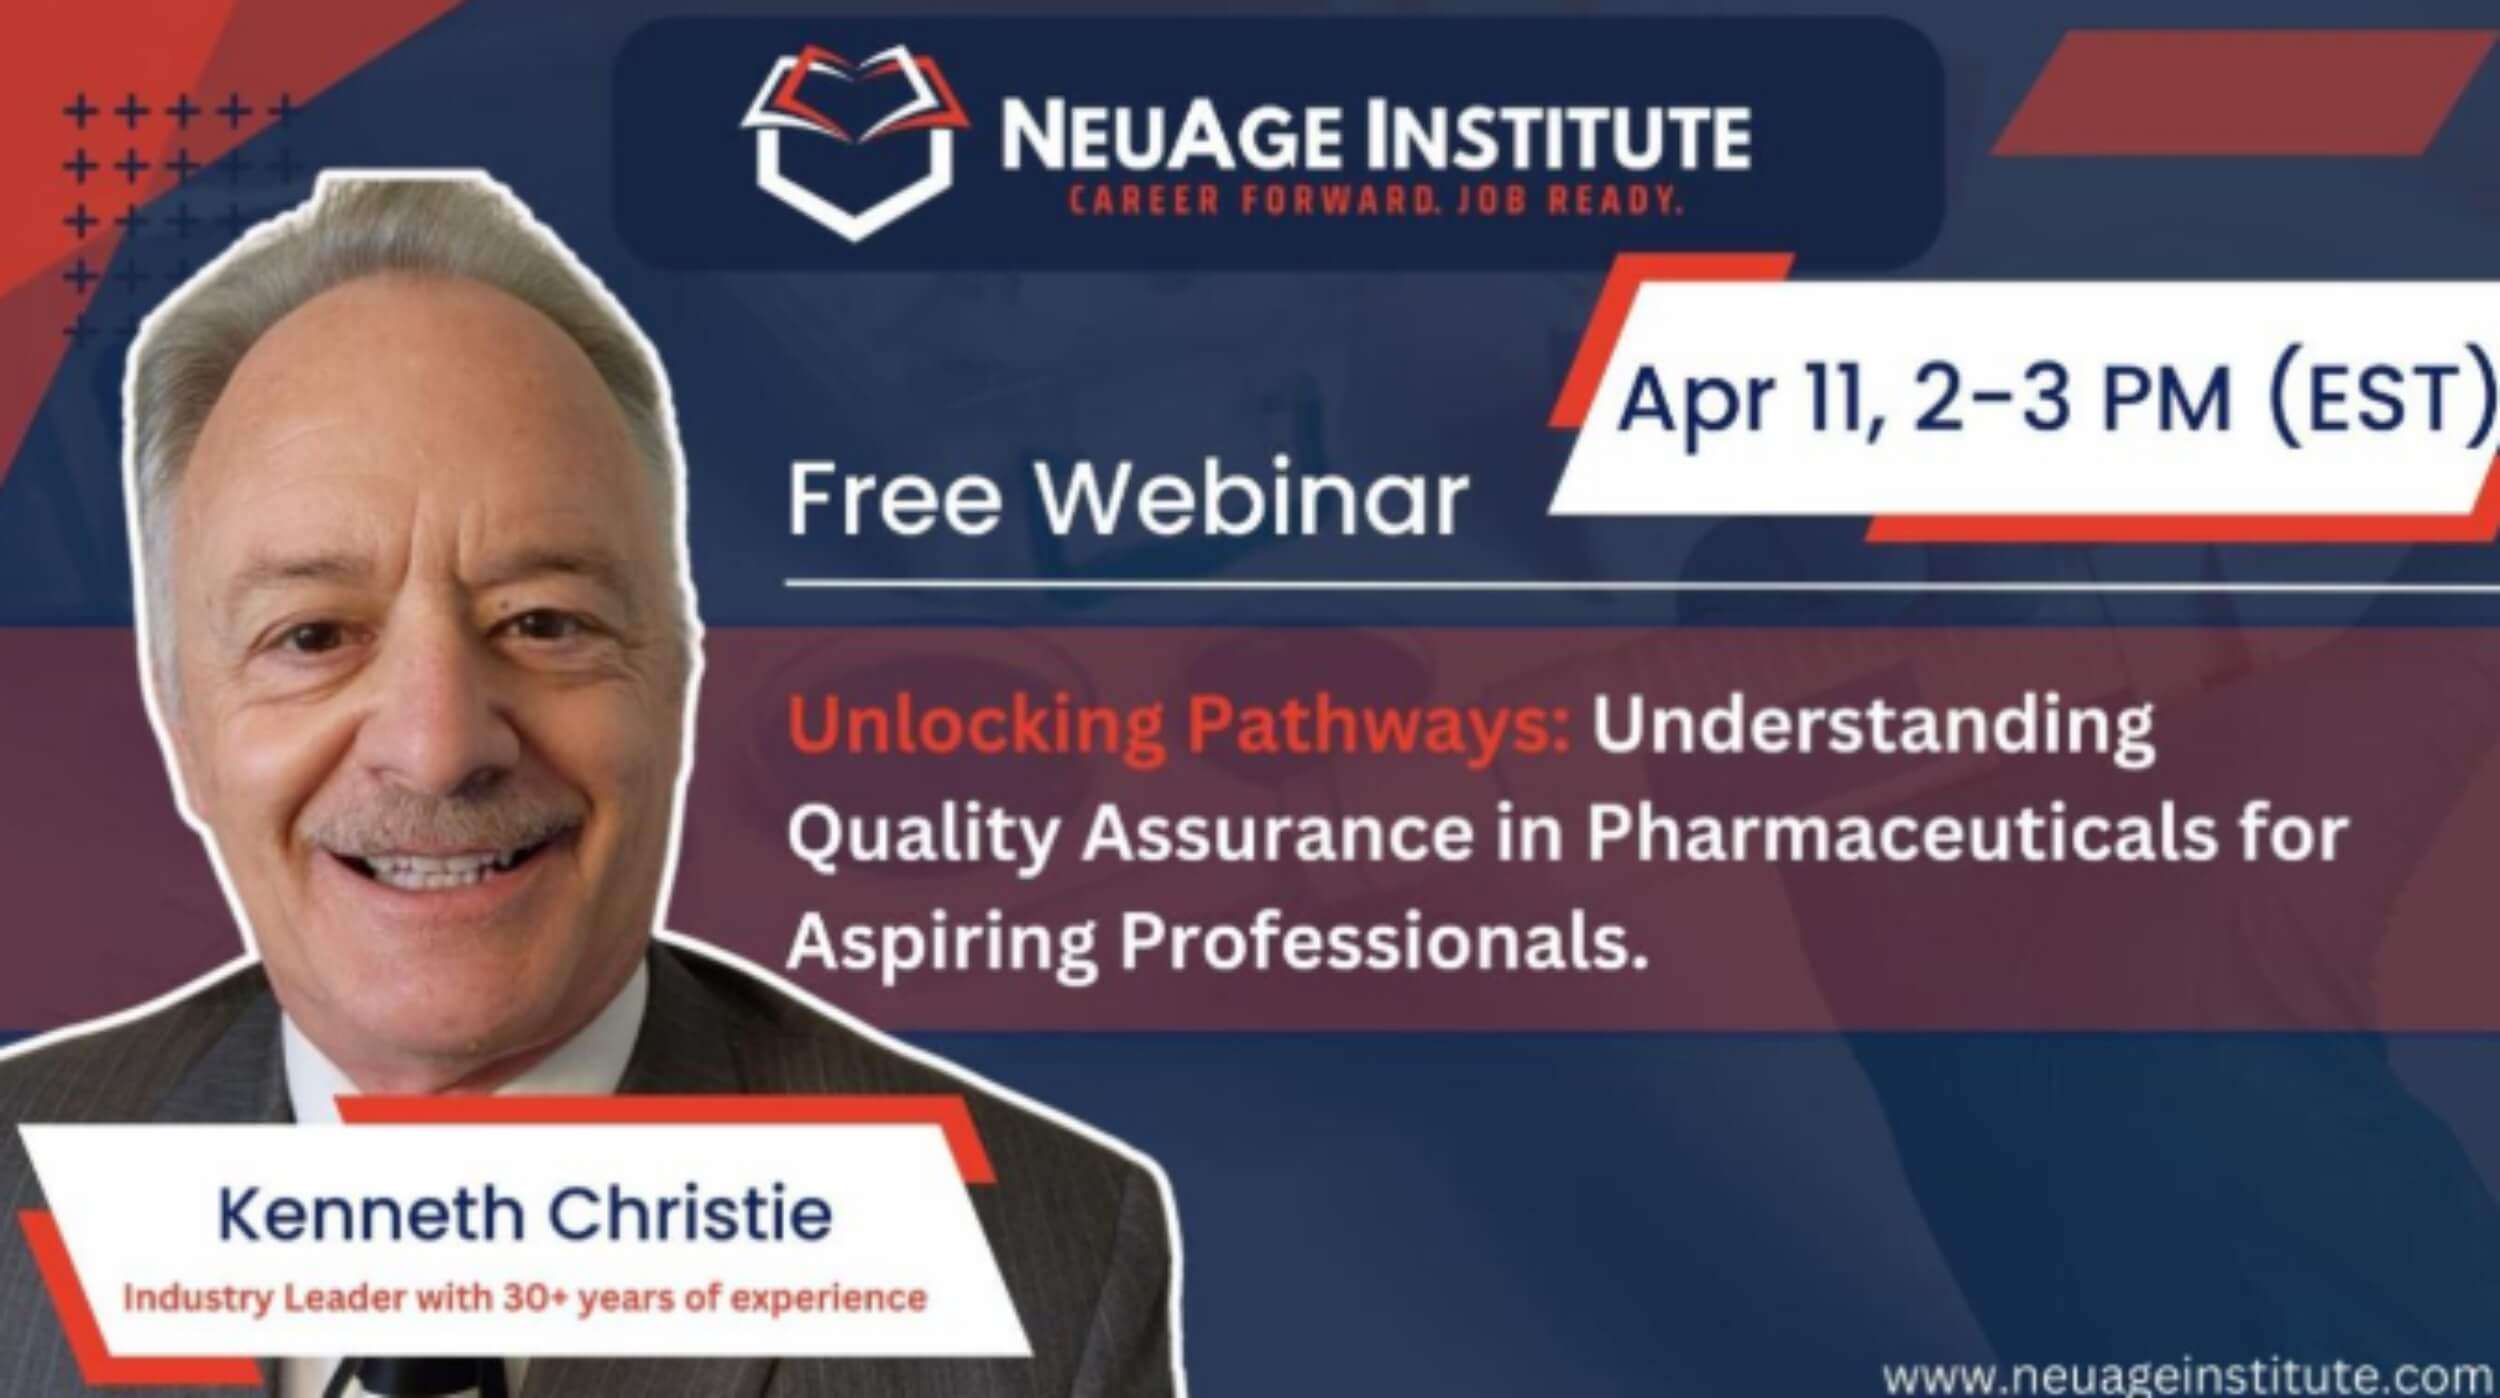 Kenneth Christie, the expert and experienced host of this quality assurance training webinar